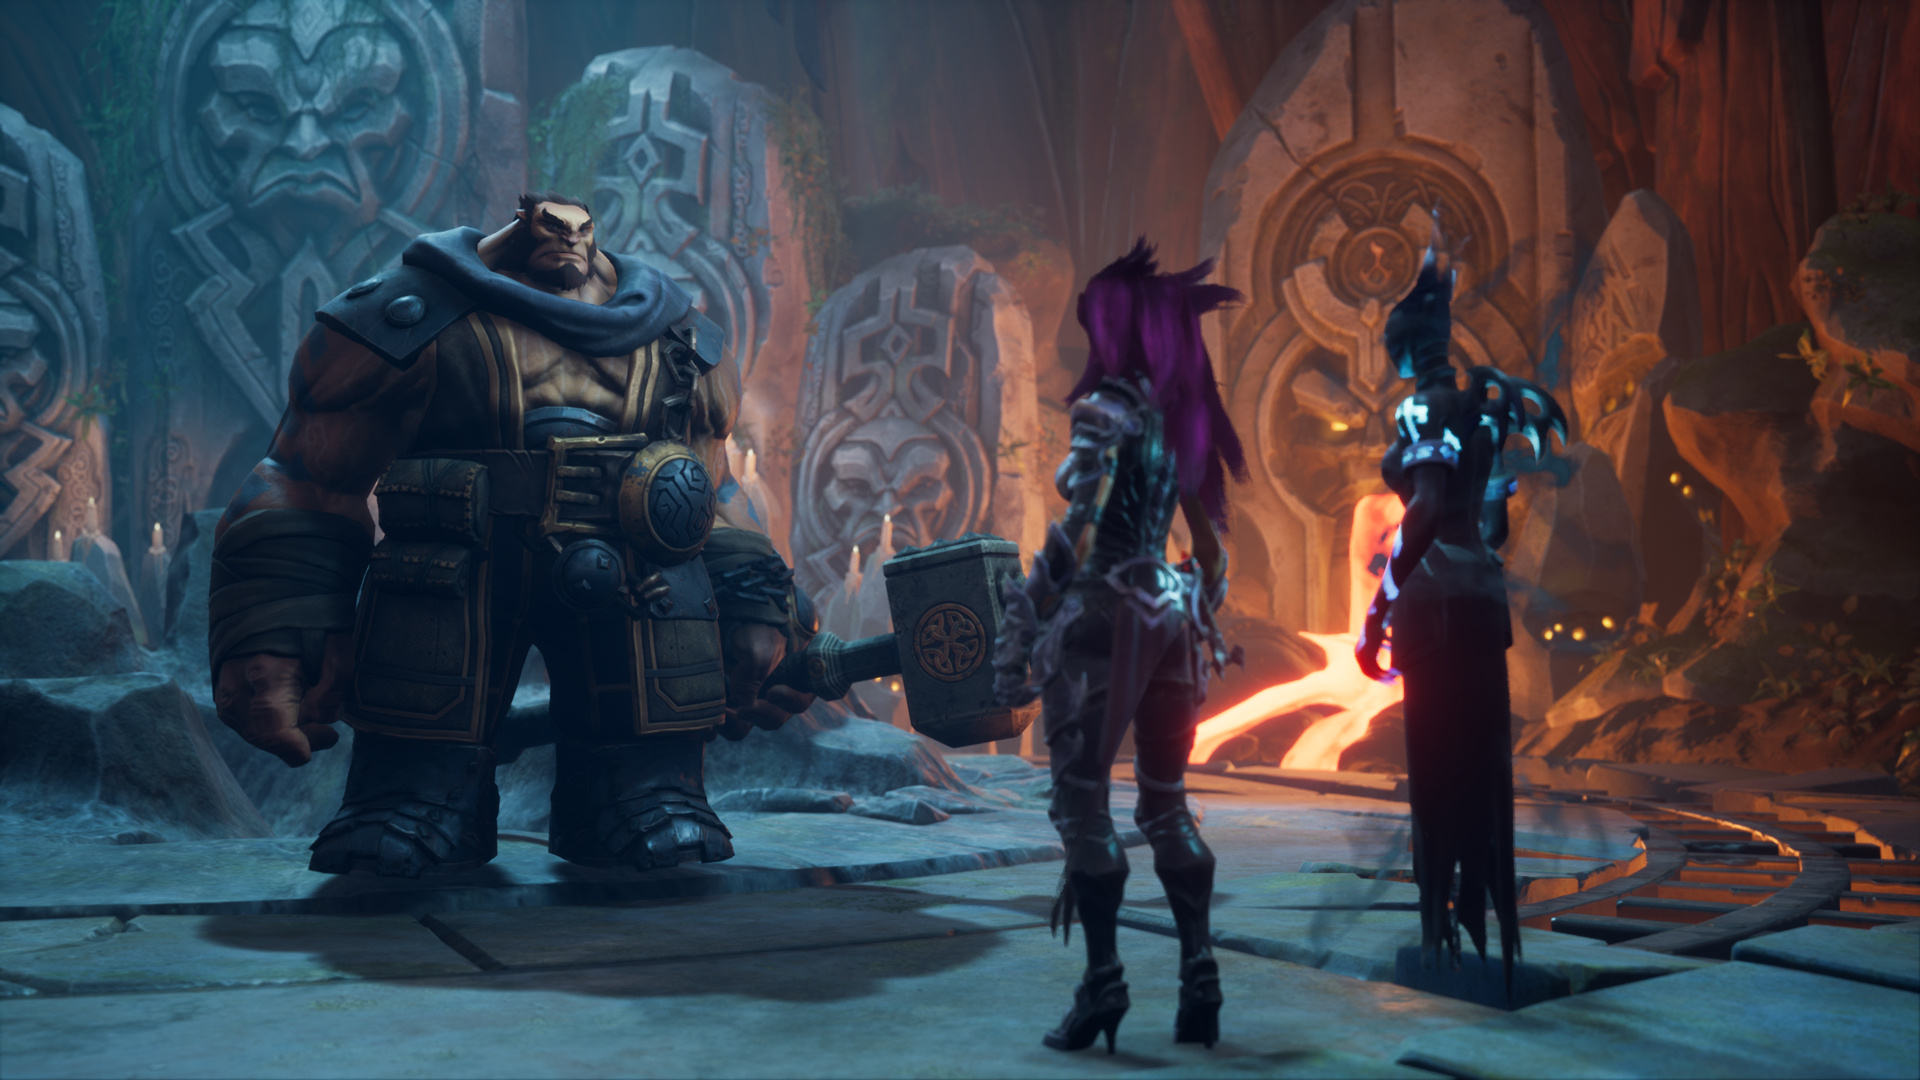 Darksiders III (PS4 / PlayStation 4) Game Profile | News ...
